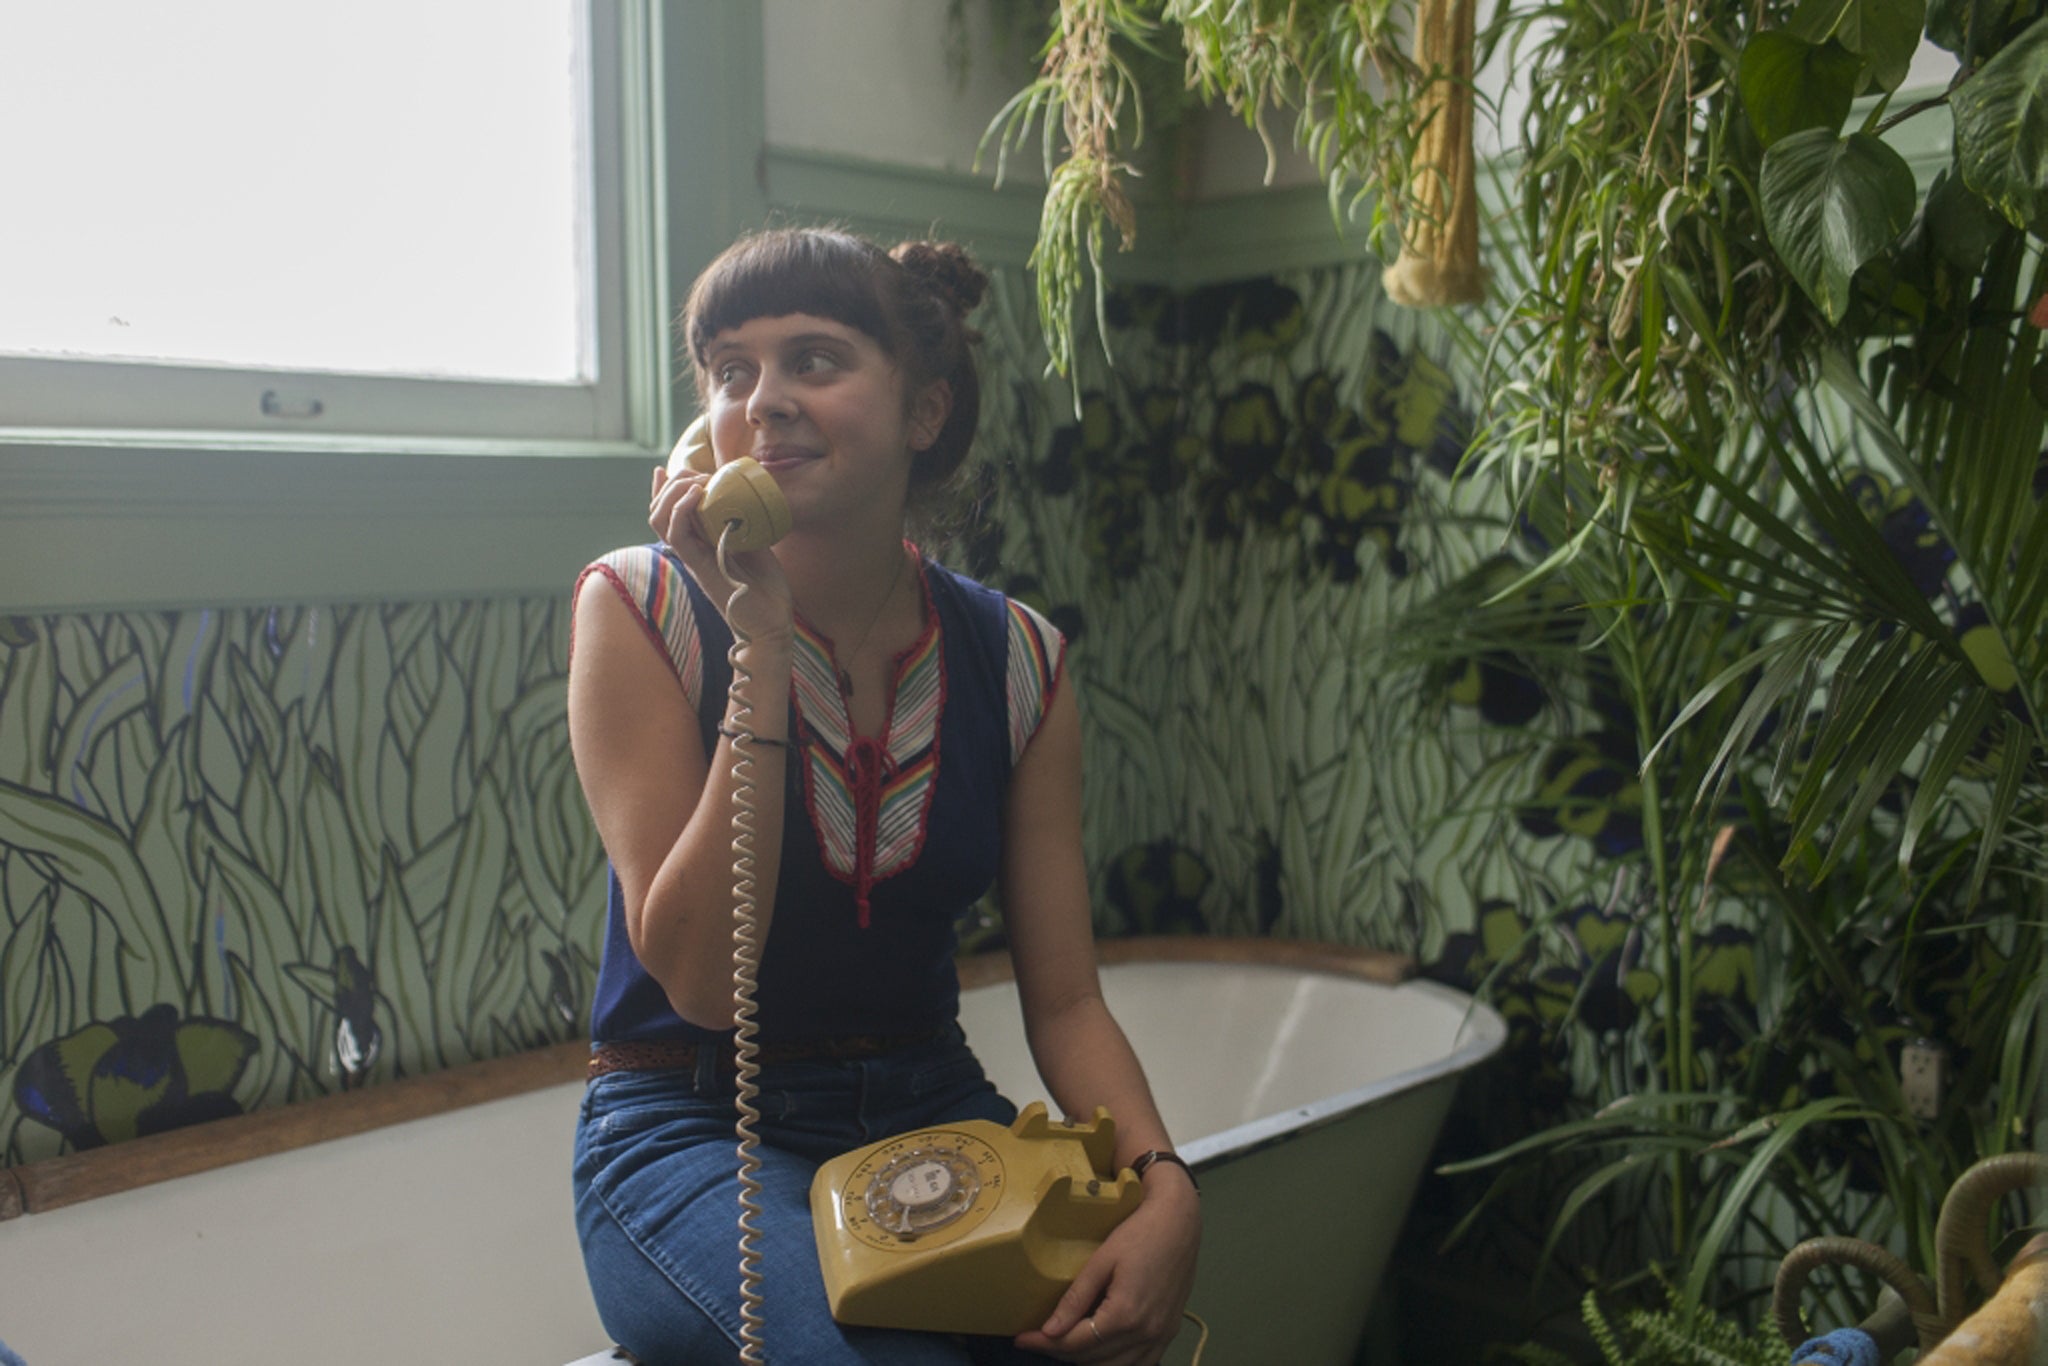 The Diary of a Teenage Girl Women filmmakers condemn all-male classification board for awarding 18 rating to film about female sexuality The Independent The Independent